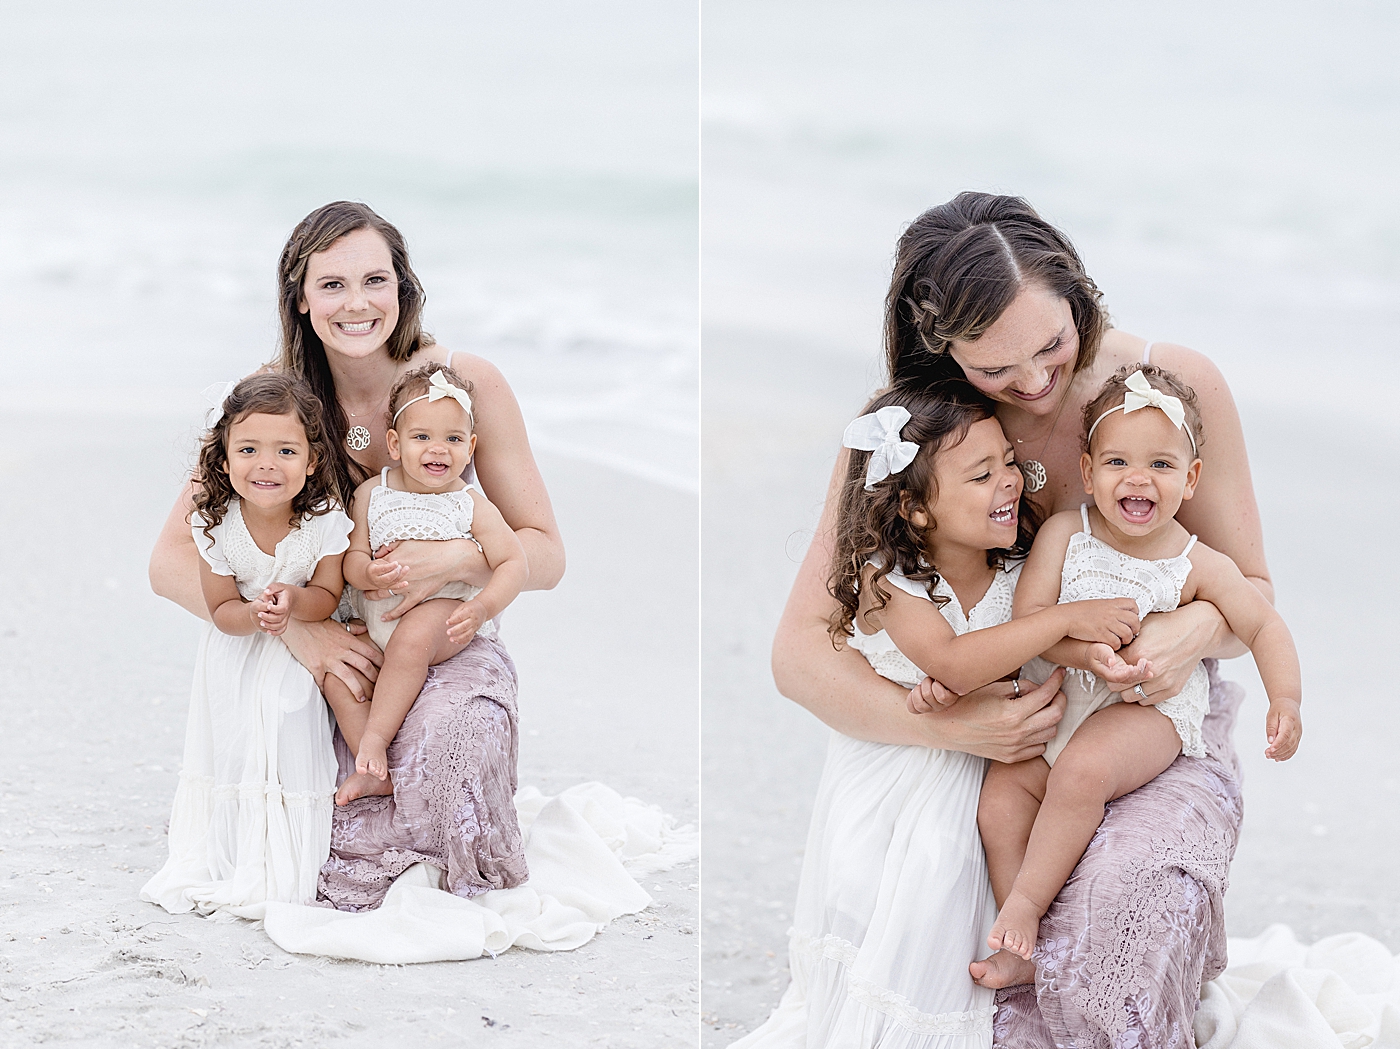 Mom and her two daughters. Photo by Brittany Elise Photography.